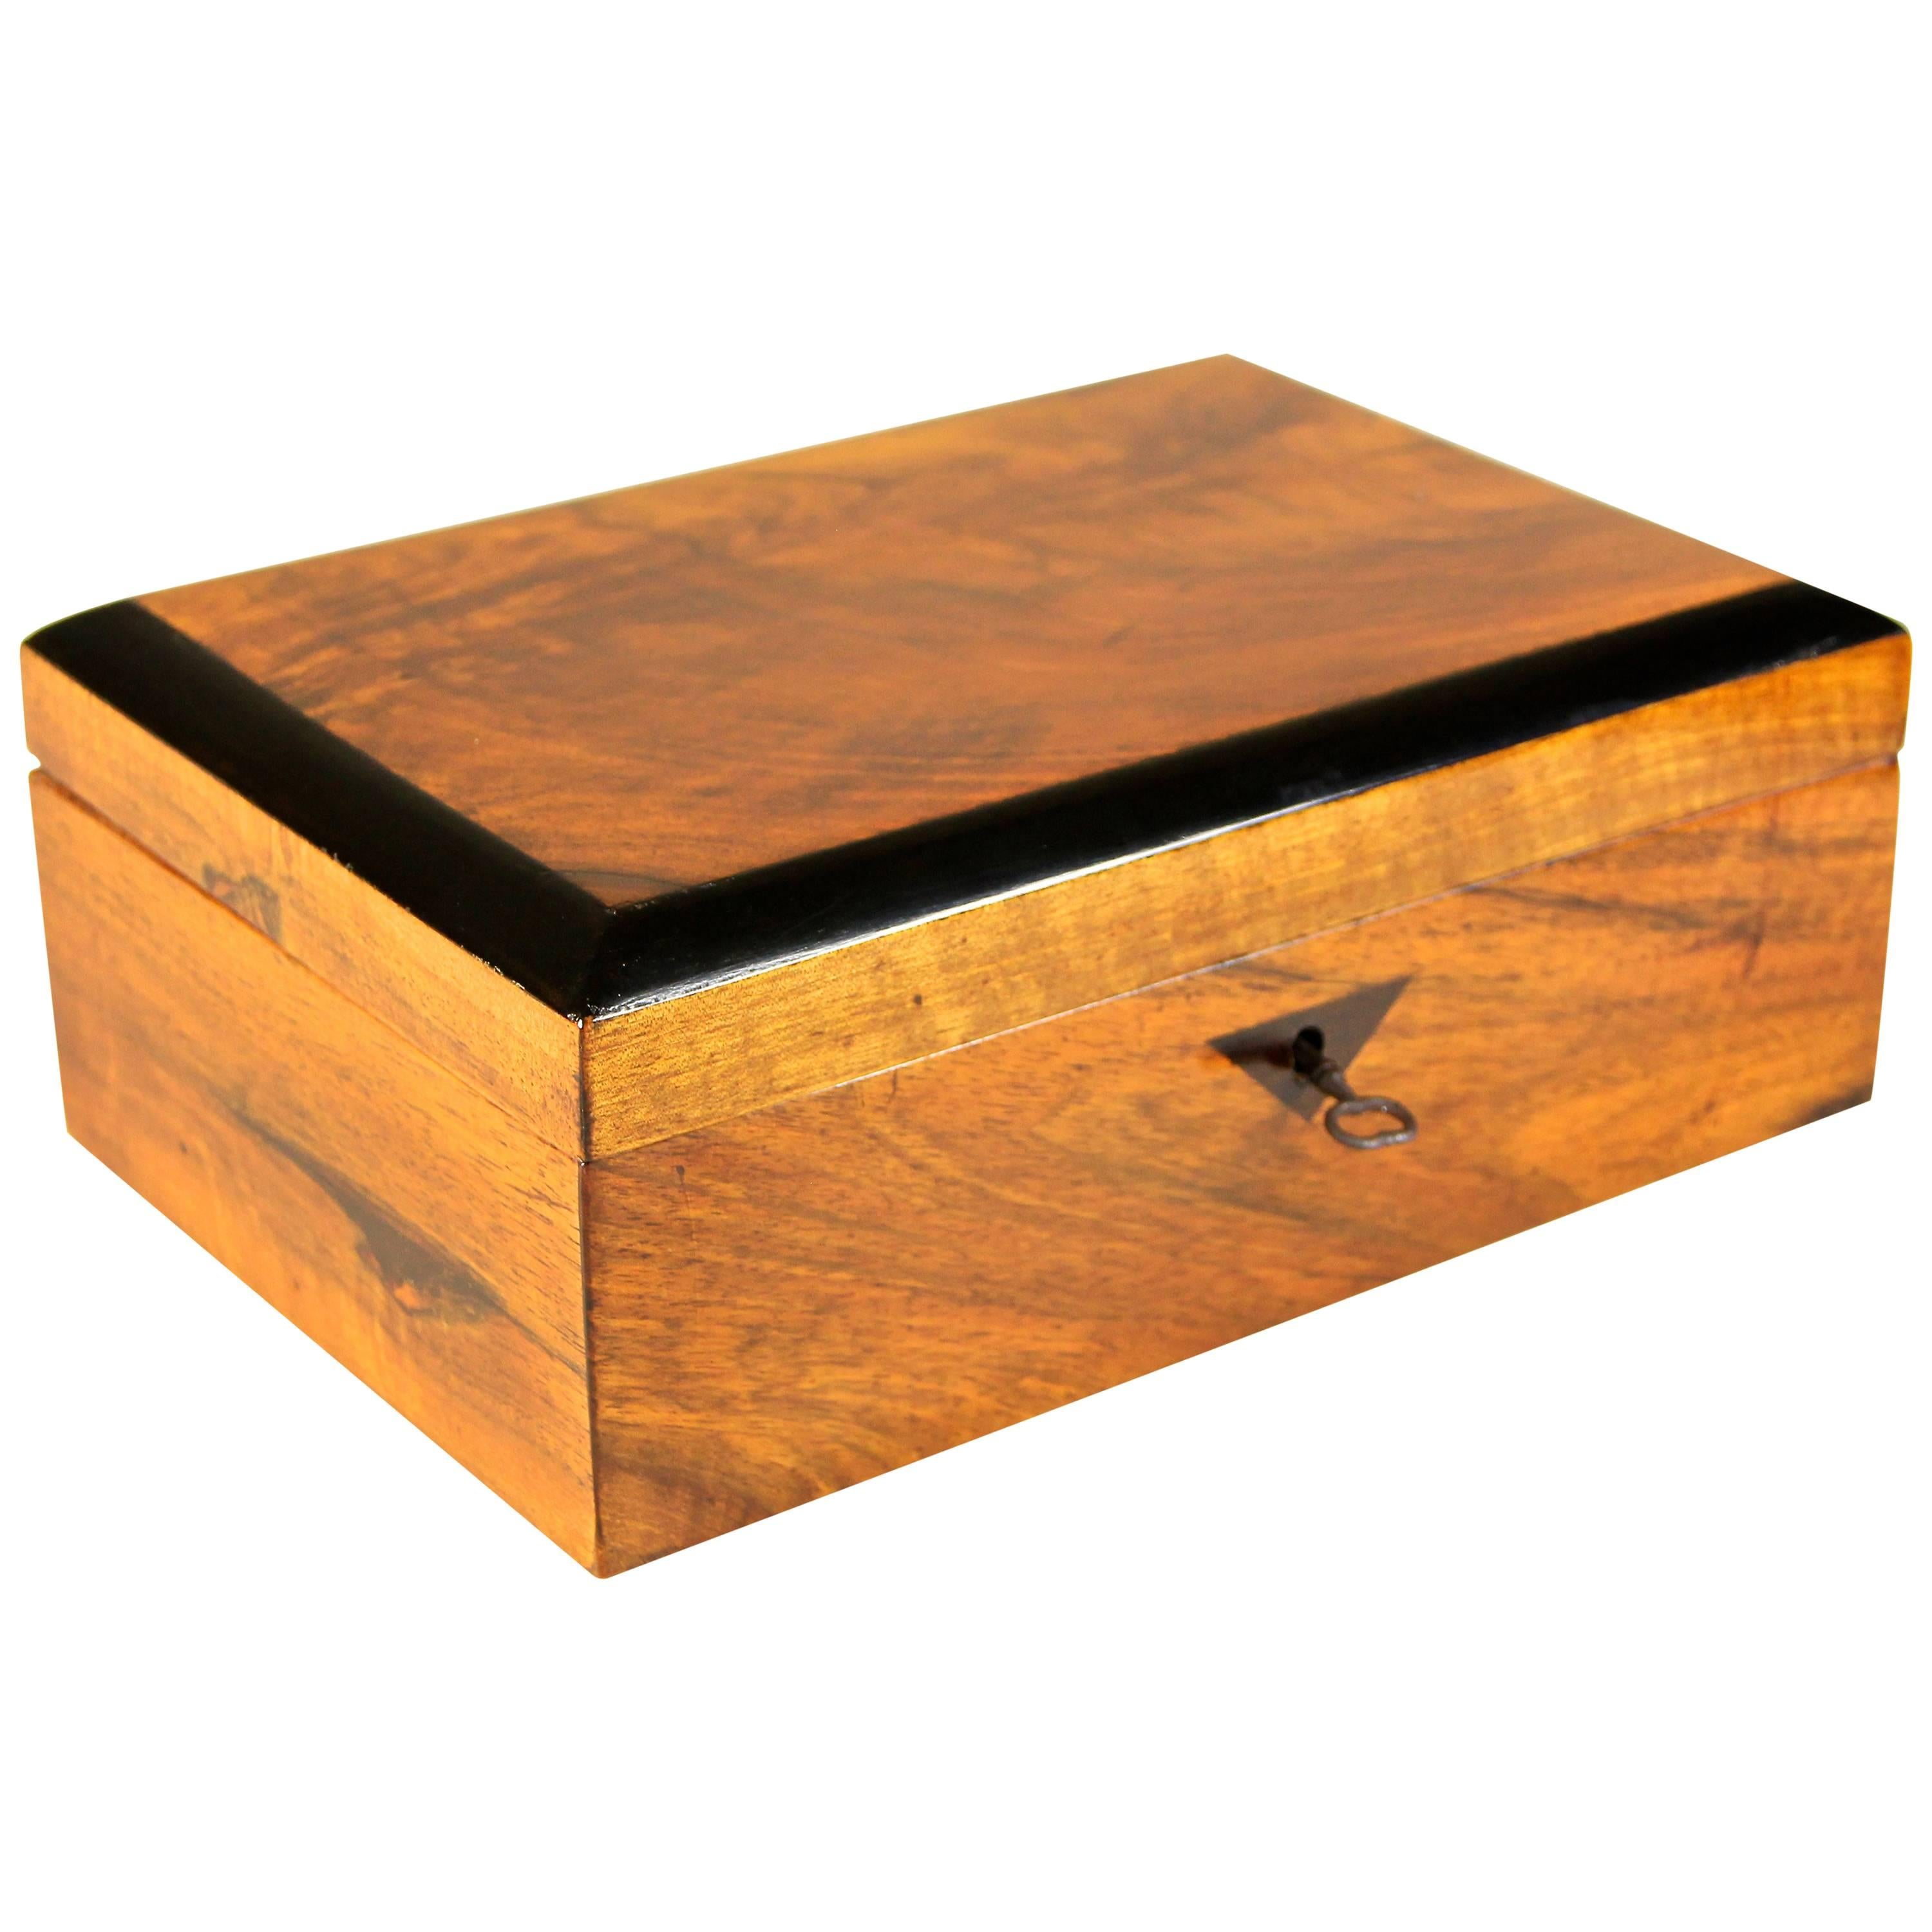 Lovely Biedermeier nut wood box from the early 19th century circa 1835 in Austria. A very decroative box veneered in fine nut wood. This simple but elegant shaped box shows a timeless design which is underlined by inlayed ebonized fruitwood framing